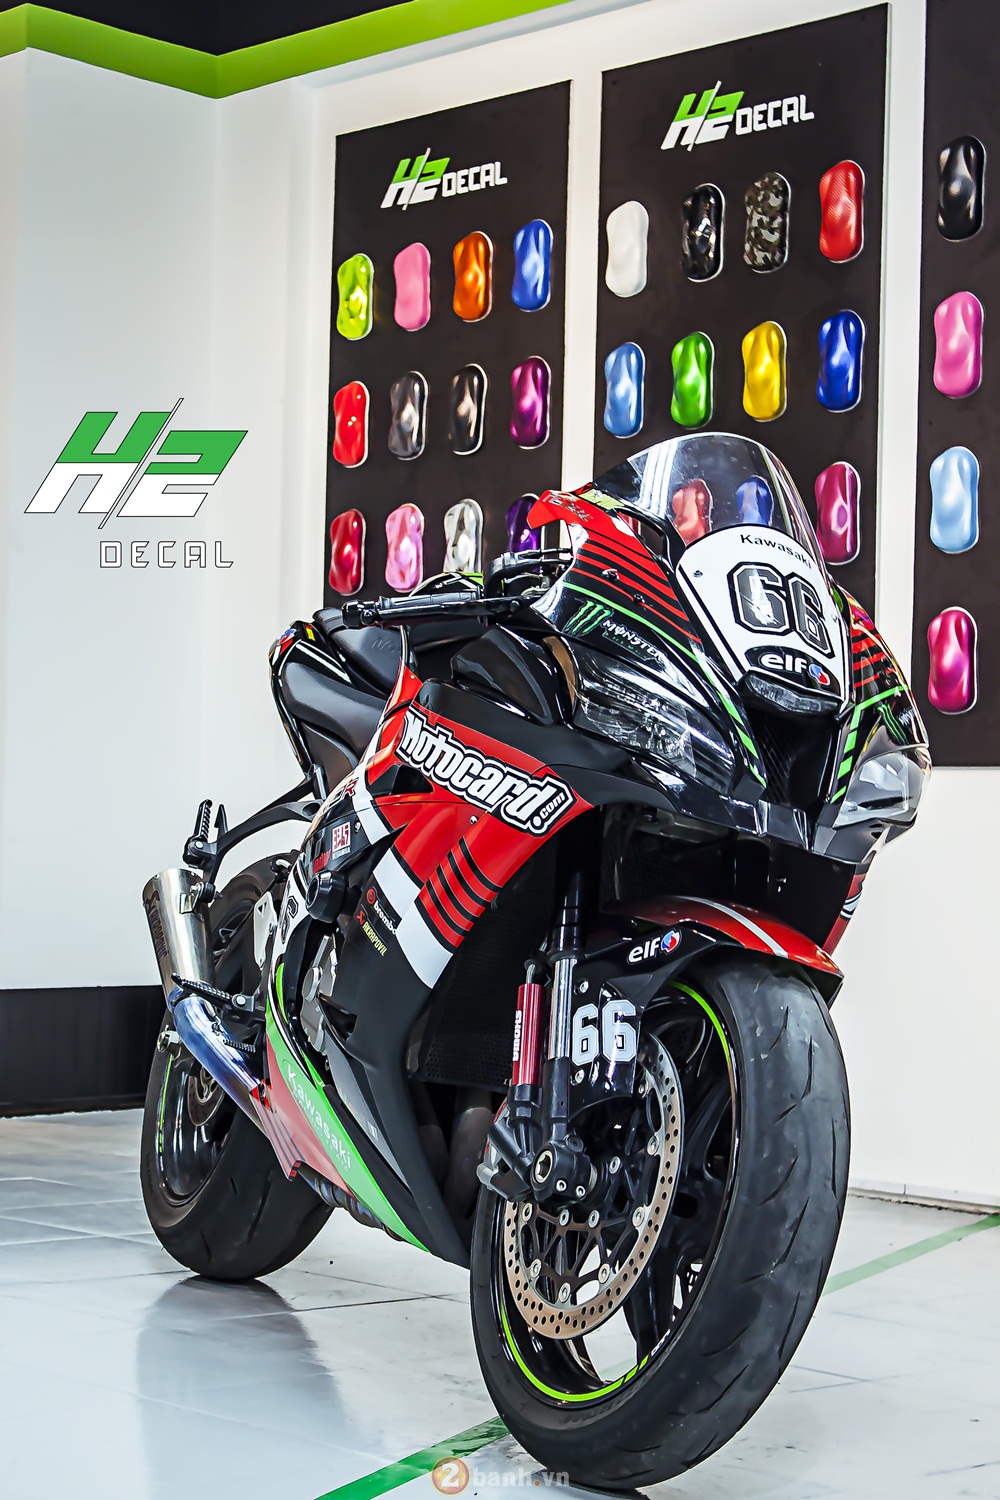 ZX10R 2016 chat choi trong bo canh dua phong canh moi - 6